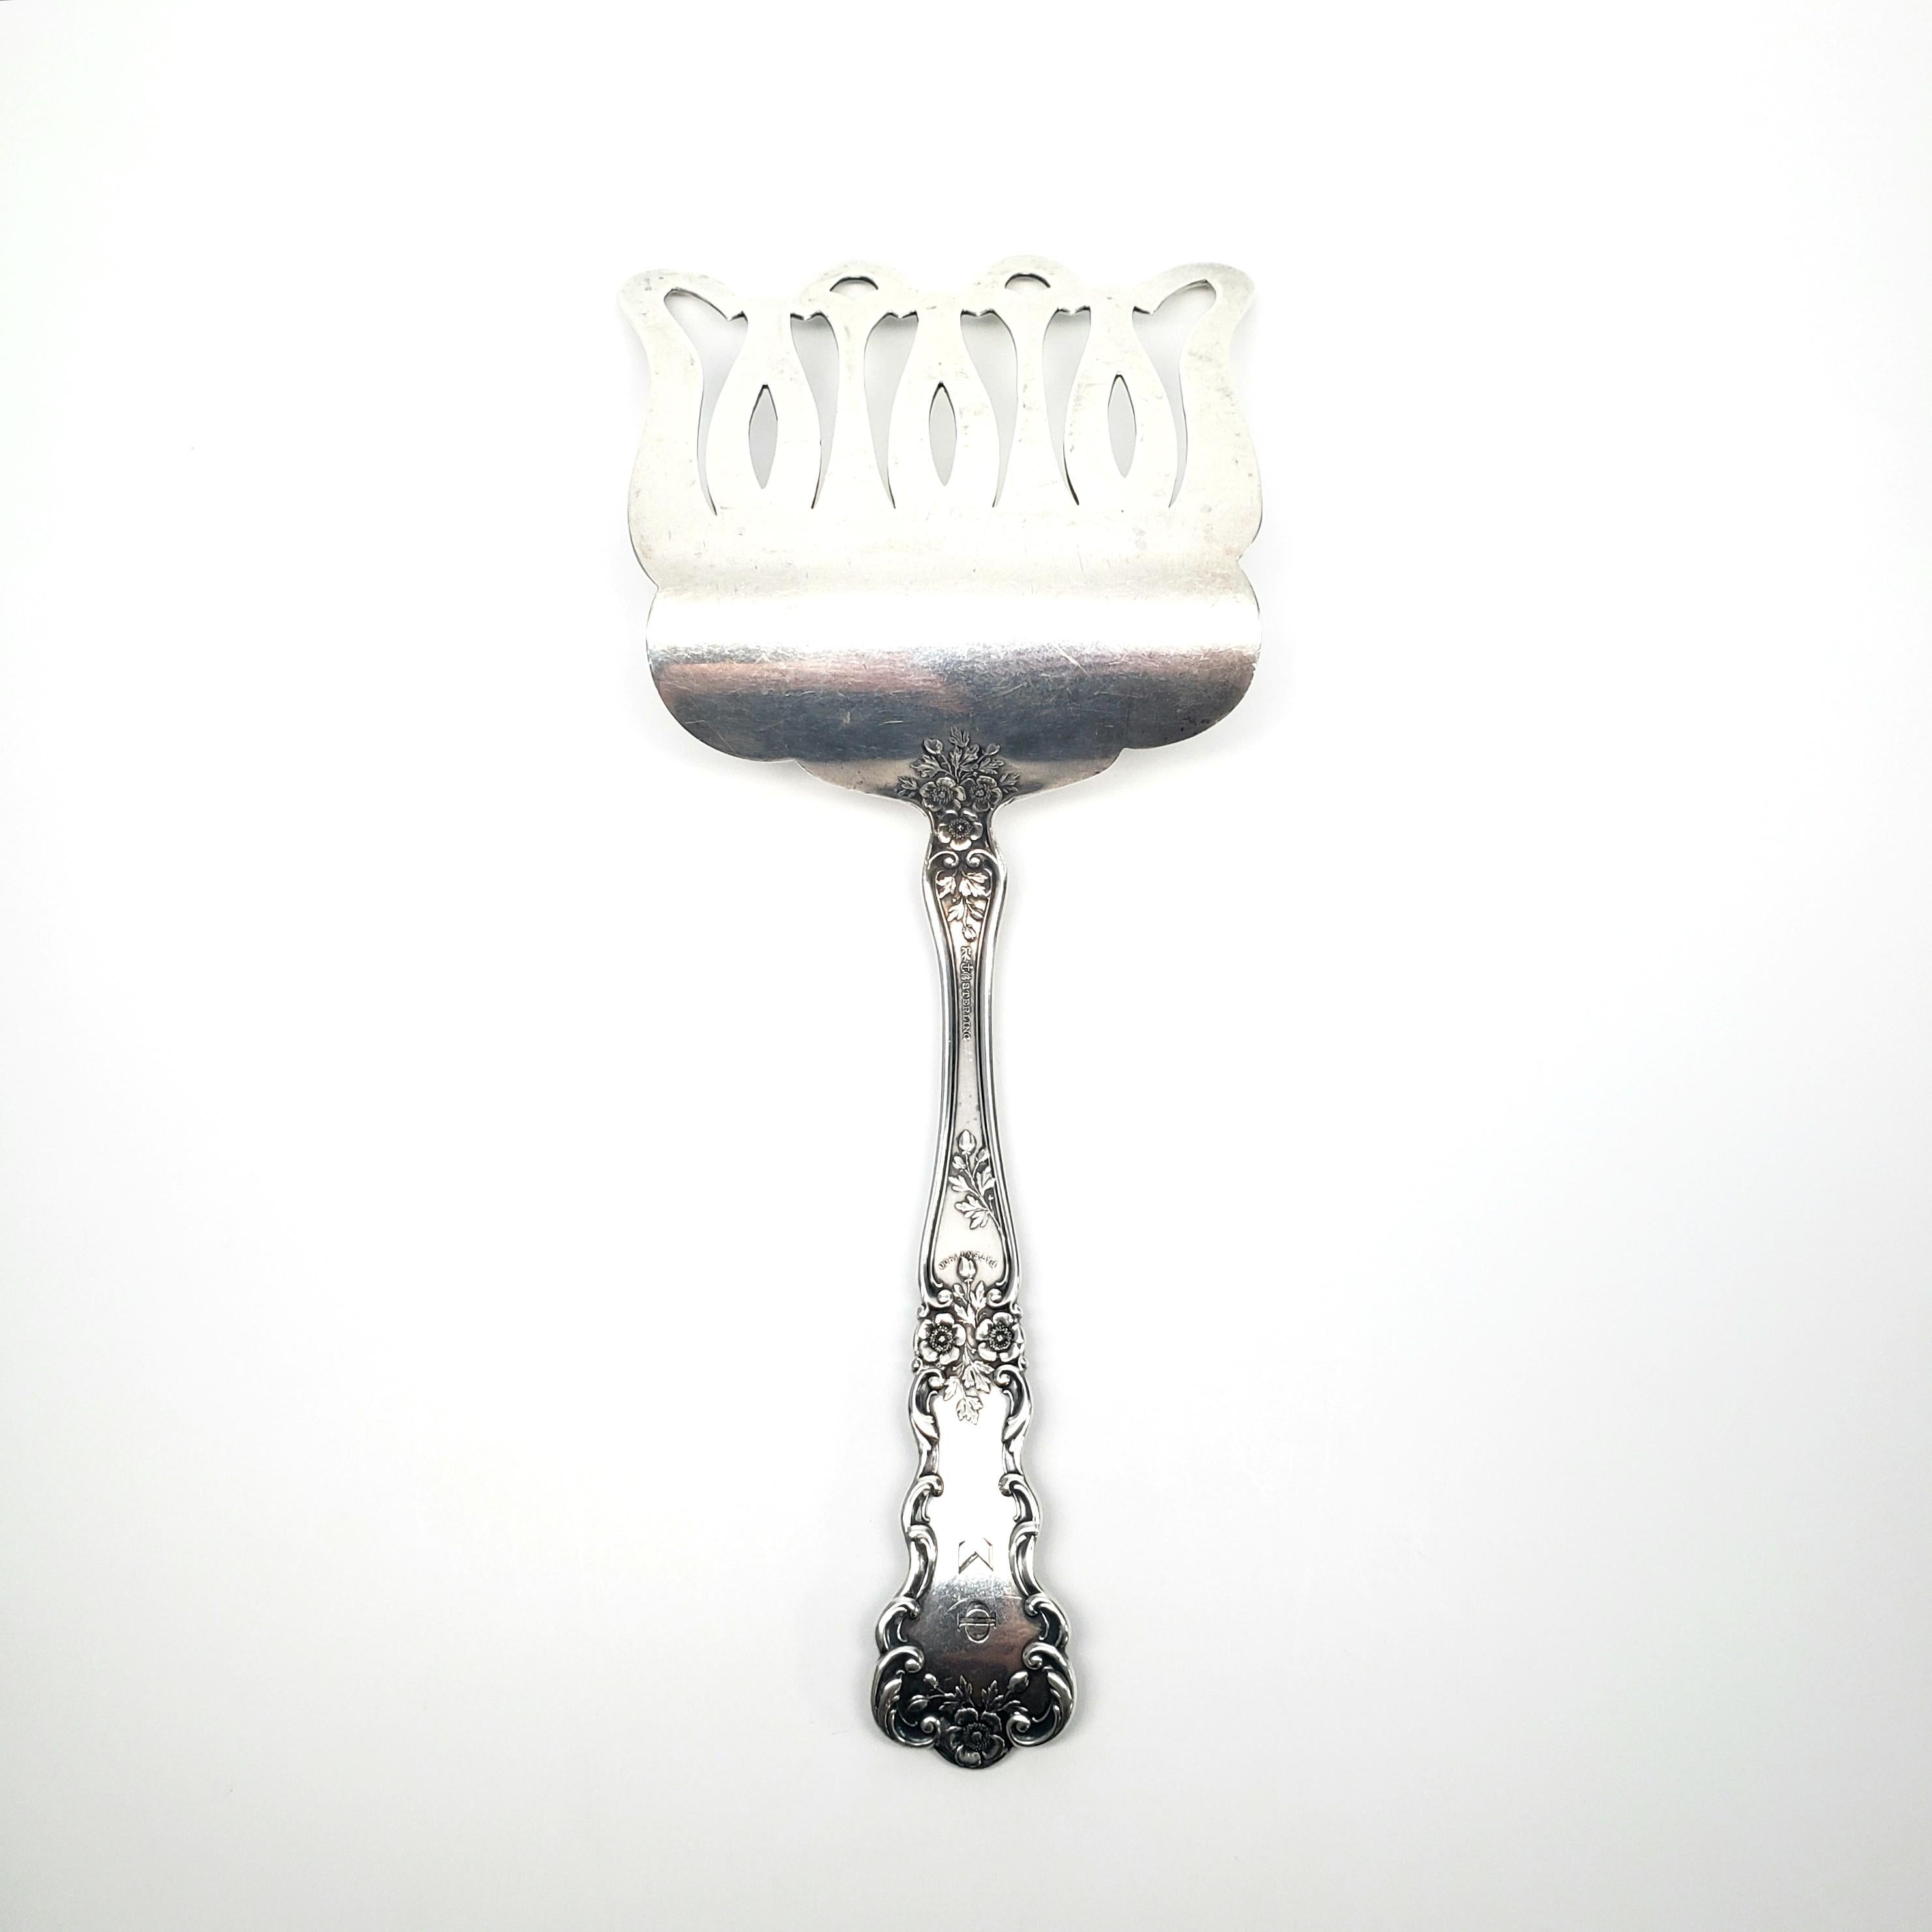 Antique sterling silver asparagus server by Gorham in the Buttercup Pattern

Gorham's Buttercup pattern was introduced in 1900. This rare piece has a solid handle with a curved 4 prong server. The monogram on the front of the handle appears to be